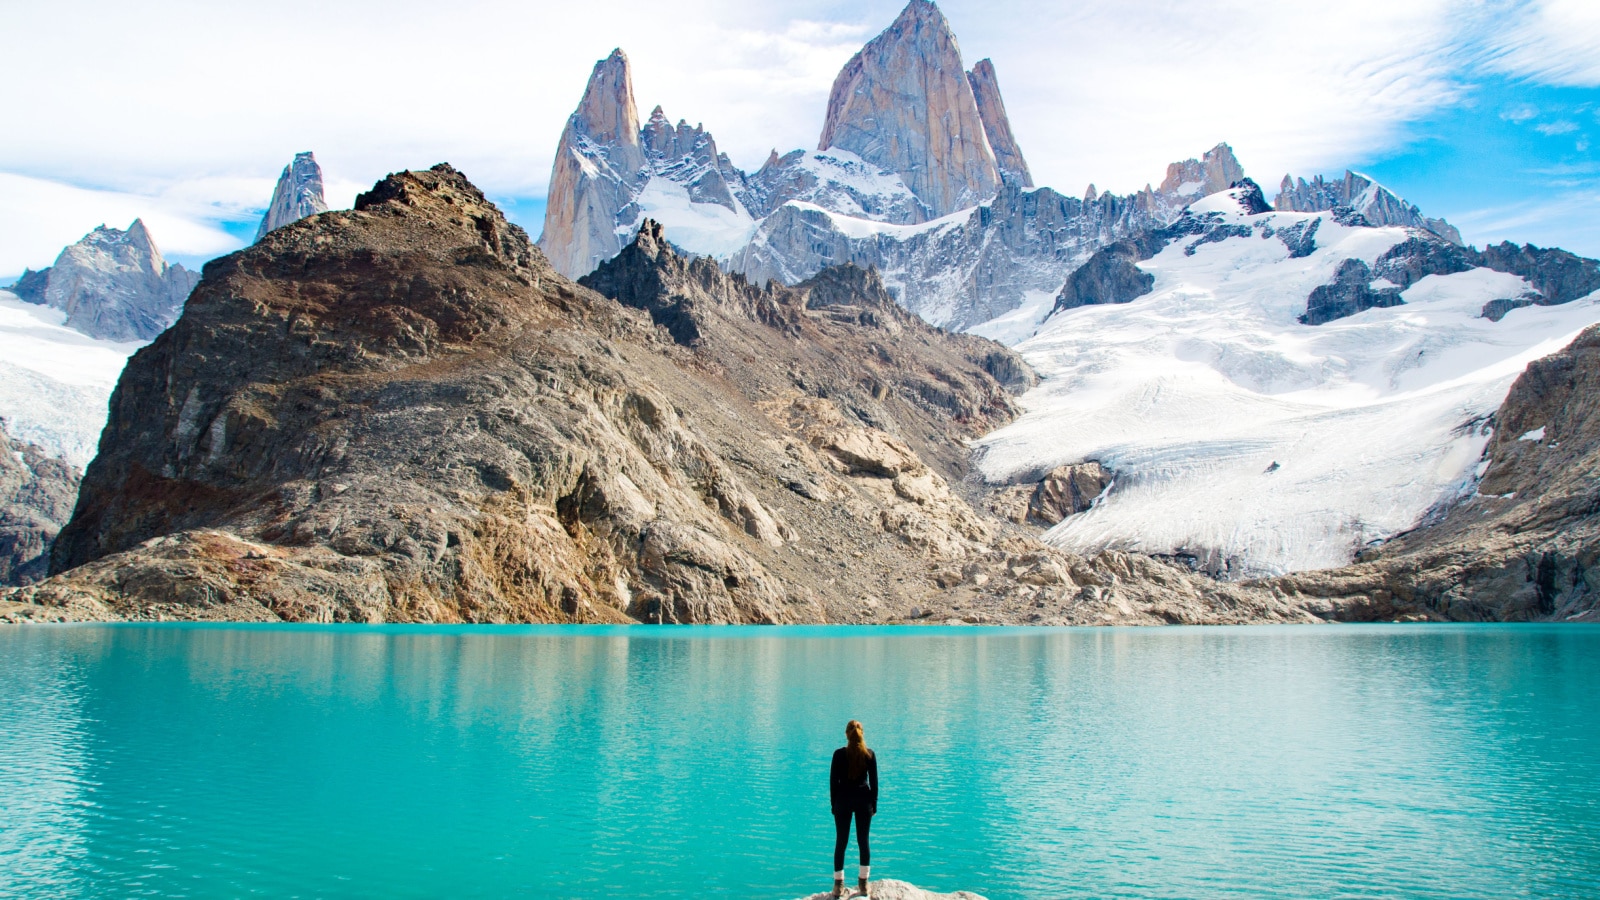 <p>Patagonia is a remote region at the southern tip of South America, spanning both Chile and <a href="https://www.have-clothes-will-travel.com/how-to-spend-10-days-in-argentina-the-ultimate-itinerary/">Argentina</a>. Its isolation comes from its vast and pristine wilderness, including glaciers, mountains, and unique wildlife like the guanaco and puma.</p>